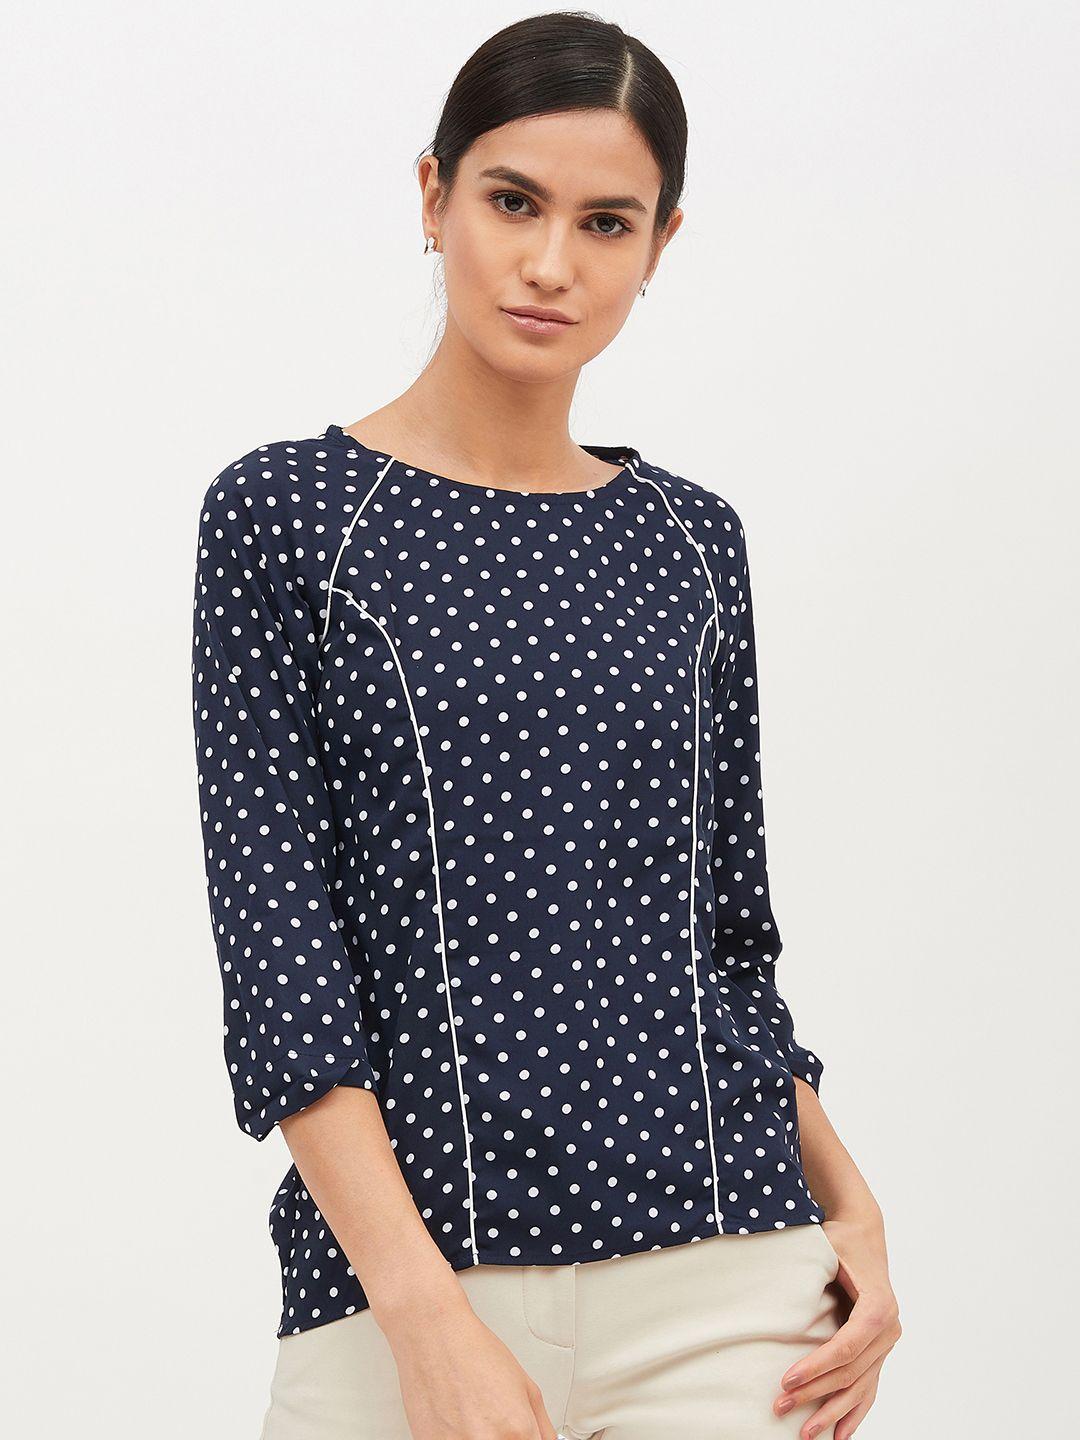 harpa women navy blue & off-white printed top